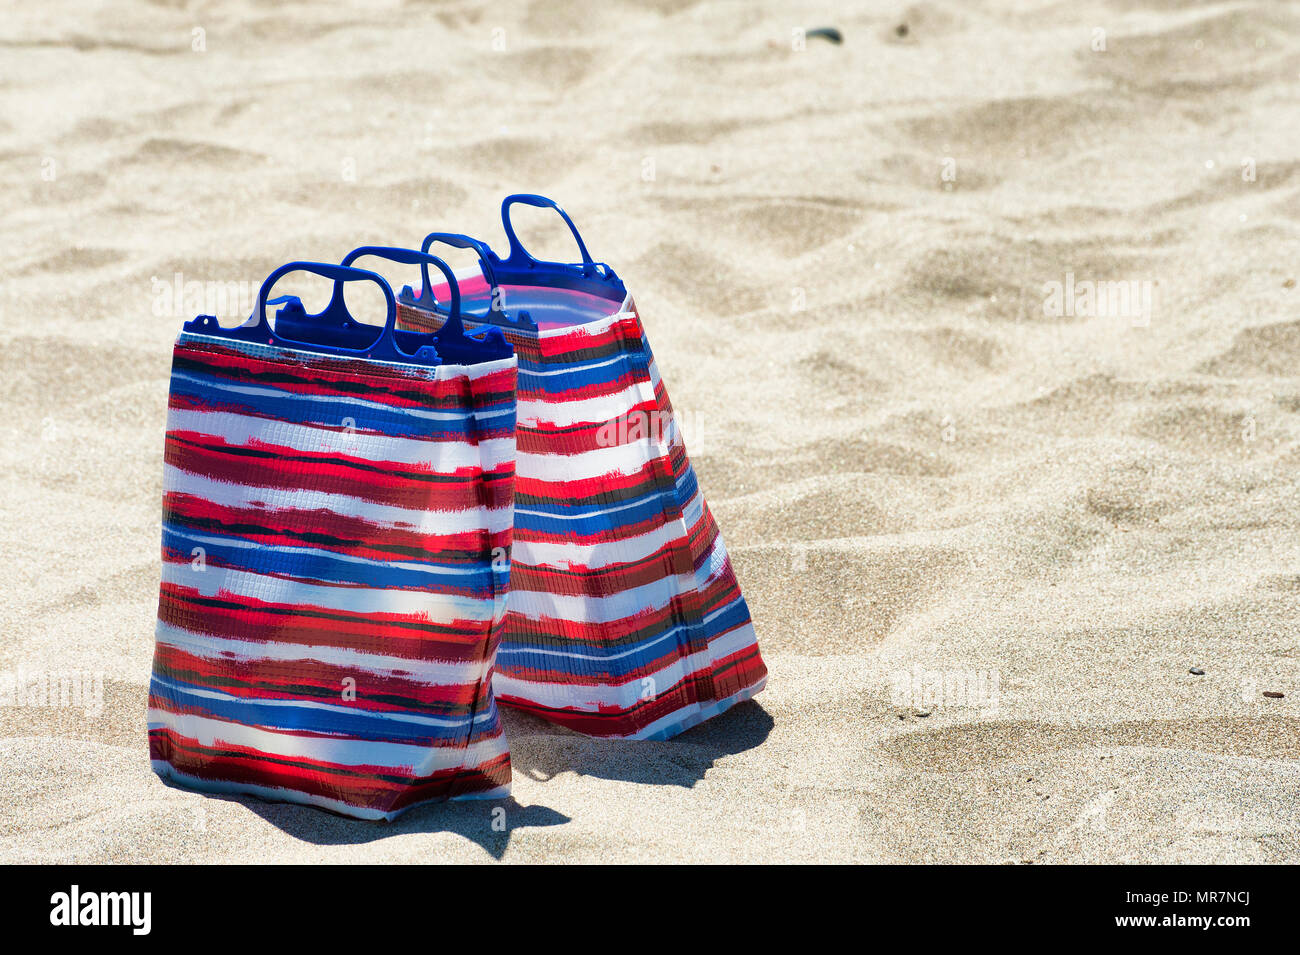 Closeup of two red,white and blue bags sitting on a sandy beach Stock Photo